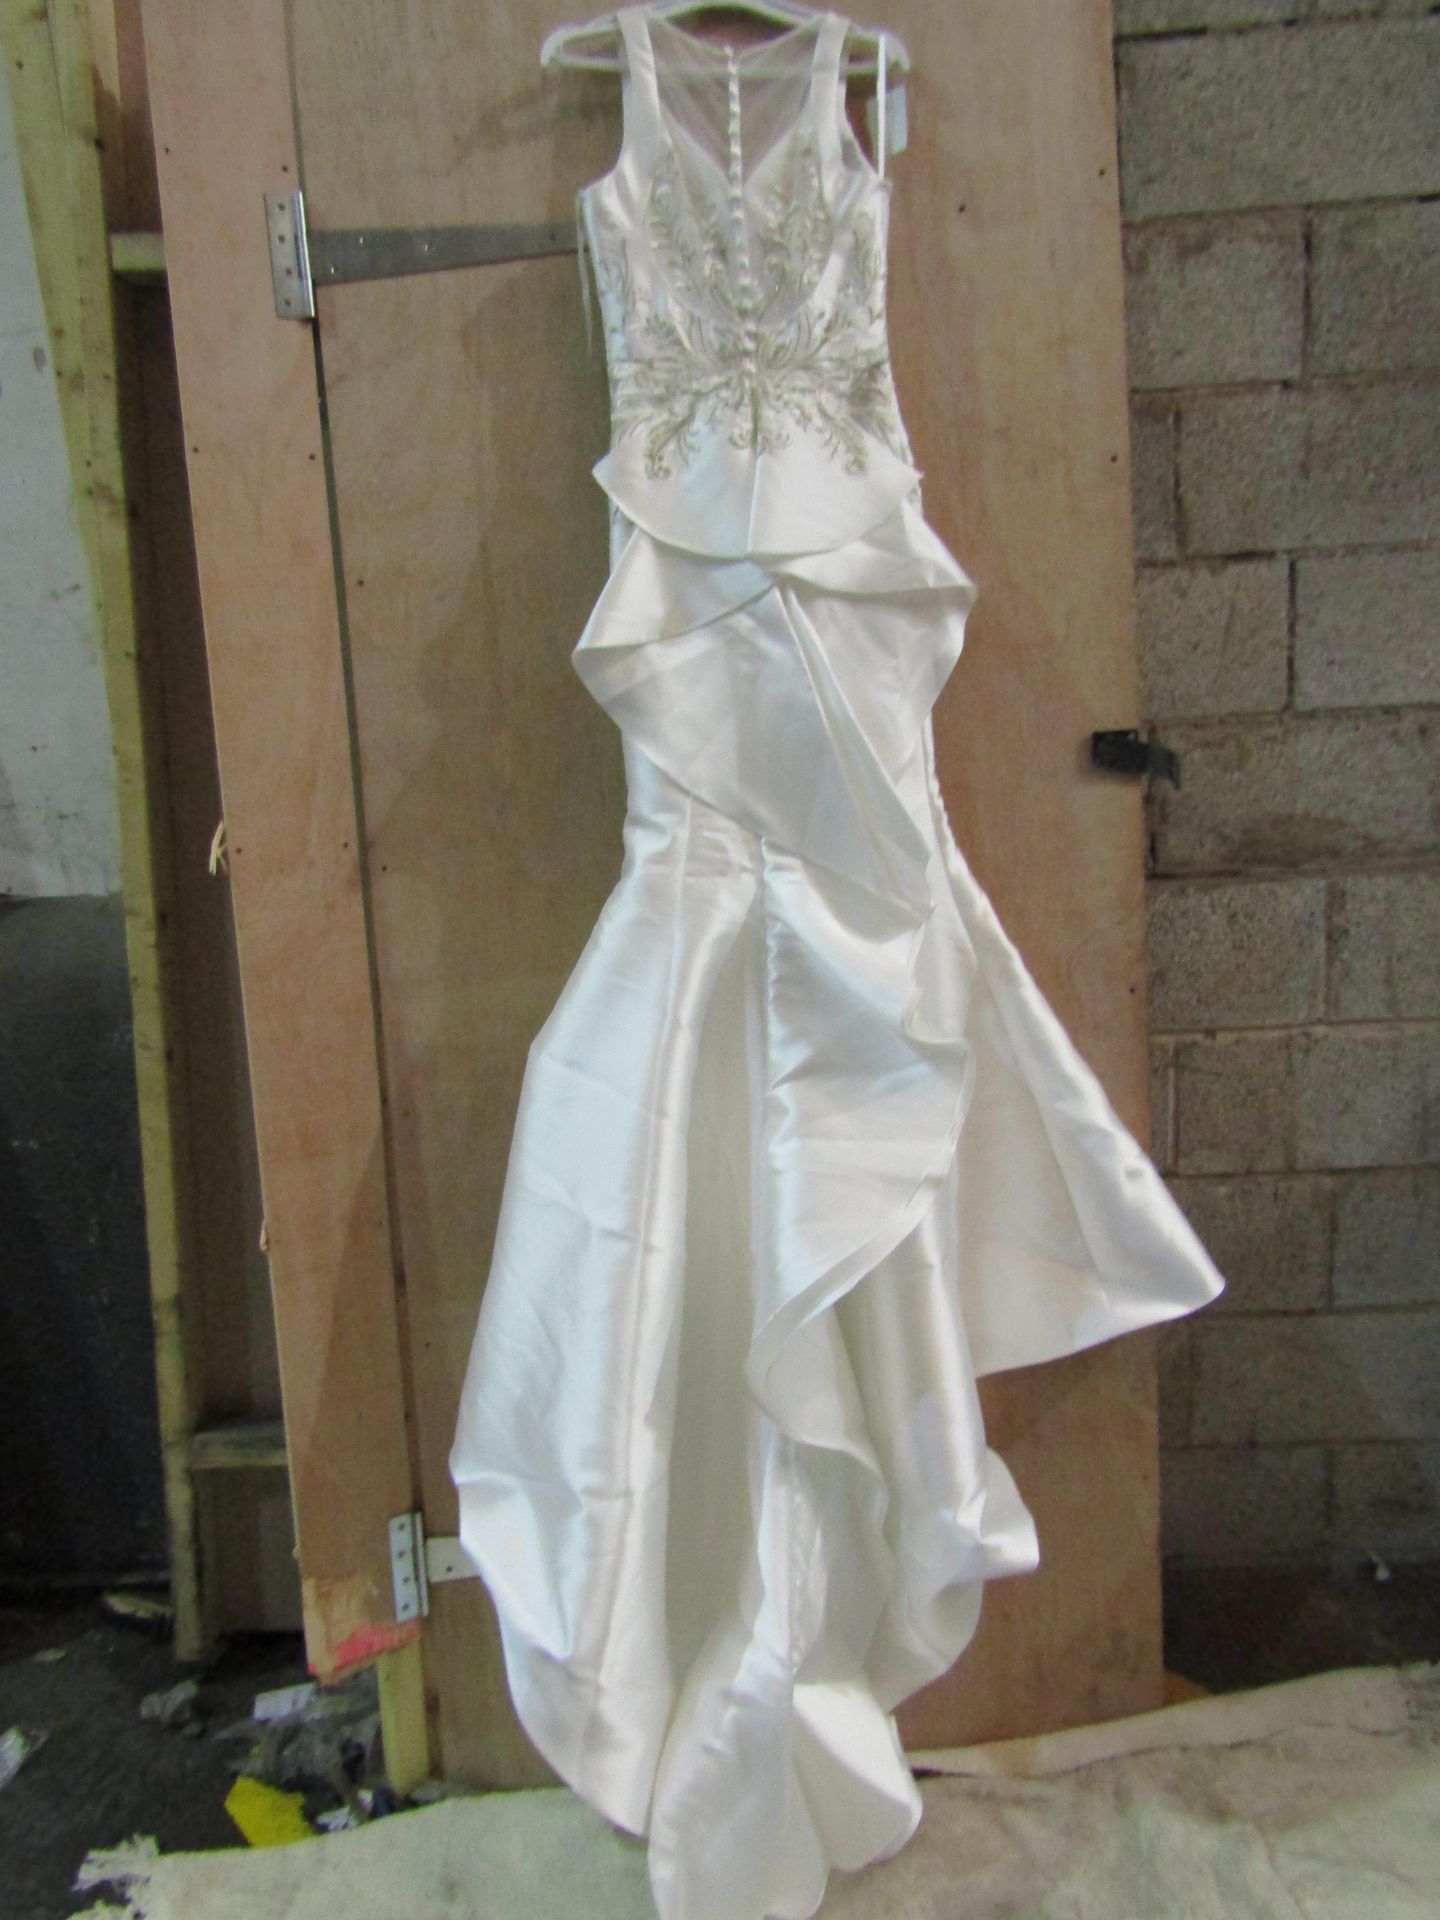 Approx 500 pieces of wedding shop stock to include wedding dresses, mother of the bride, dresses, - Image 58 of 71